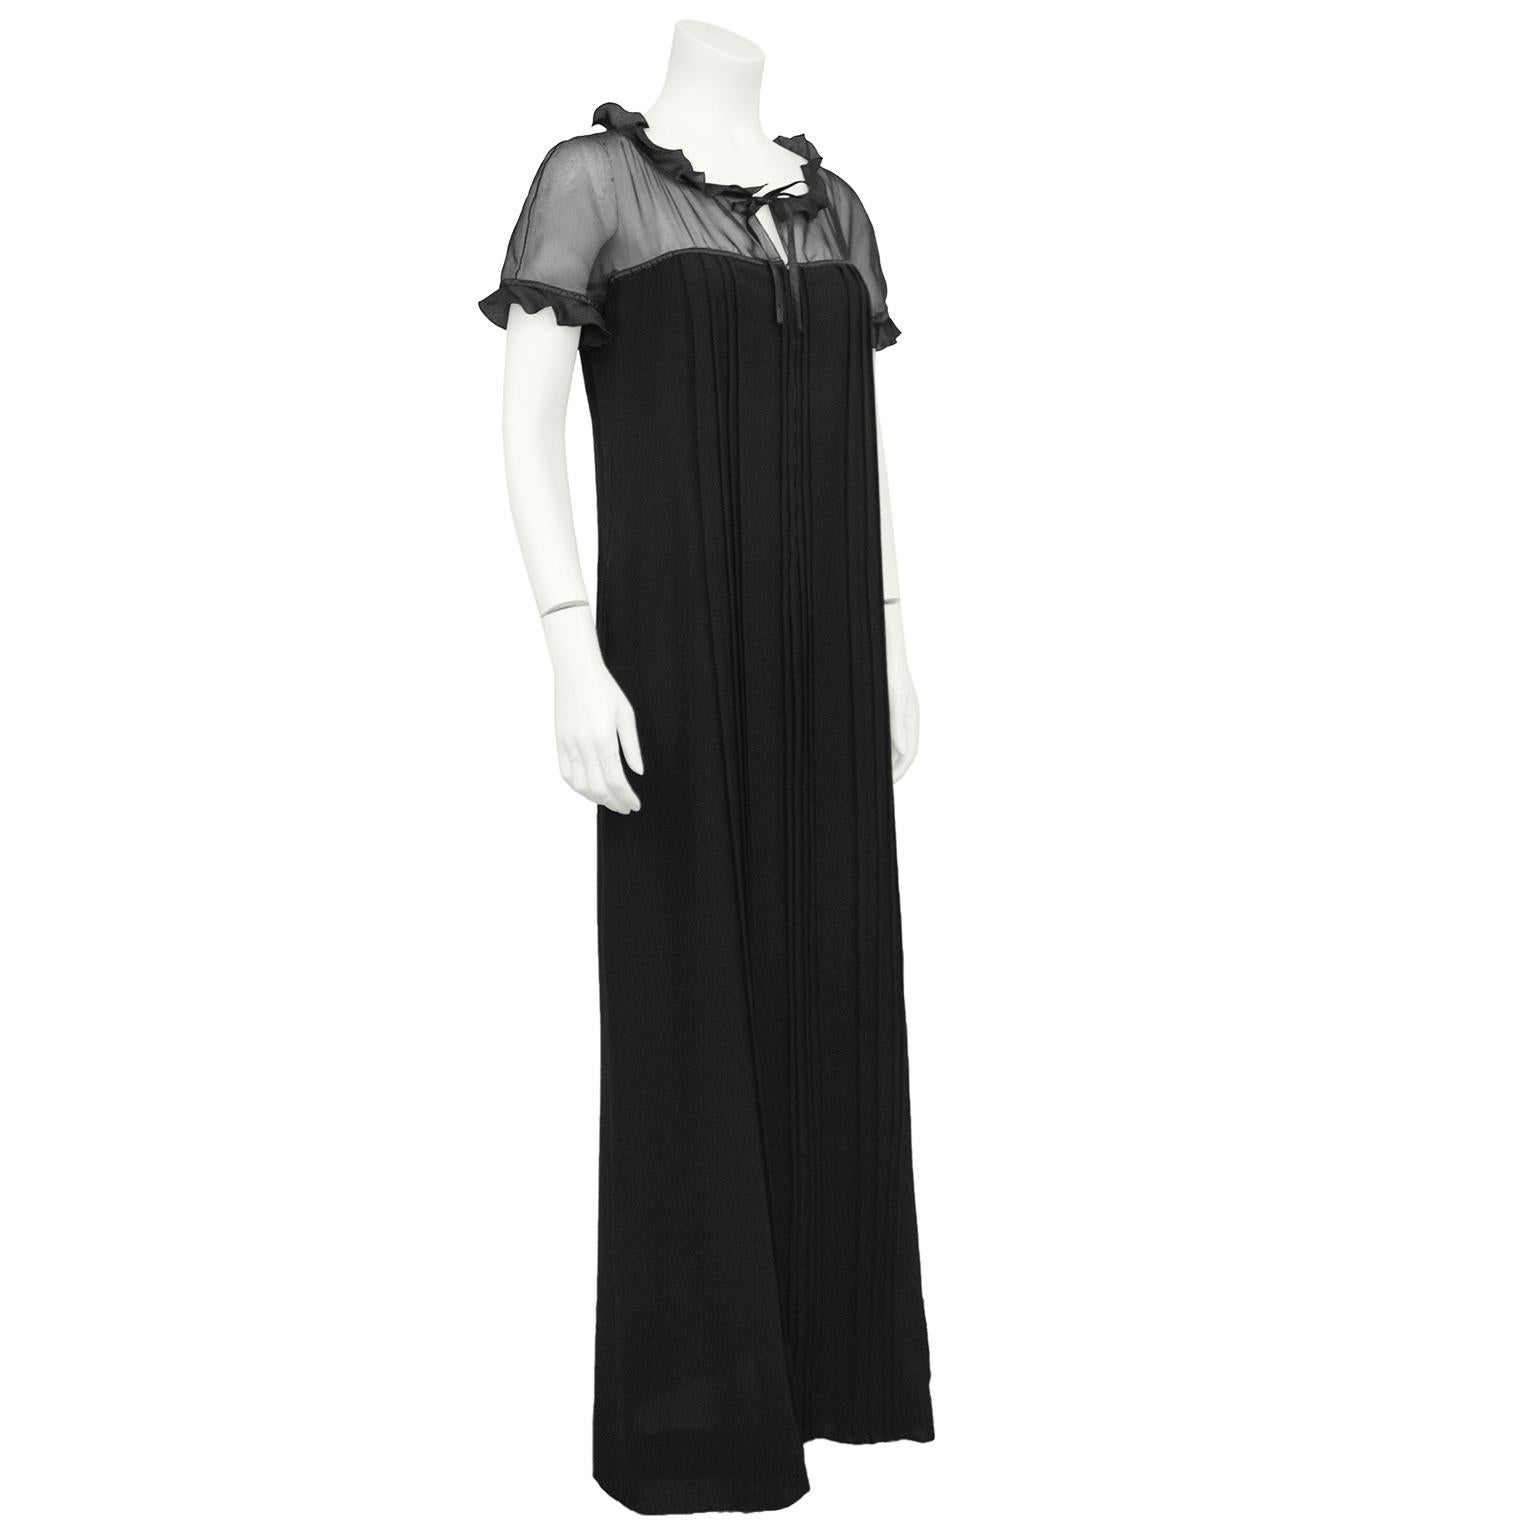 Beautiful 1970s gown by Courreges. Sheer black chiffon yoke and cap sleeves with a black satin ruffle across neckline and hem of sleeves. Tie at neckline creating a small keyhole. The gown then cascades to the floor in black wool with micro stitch